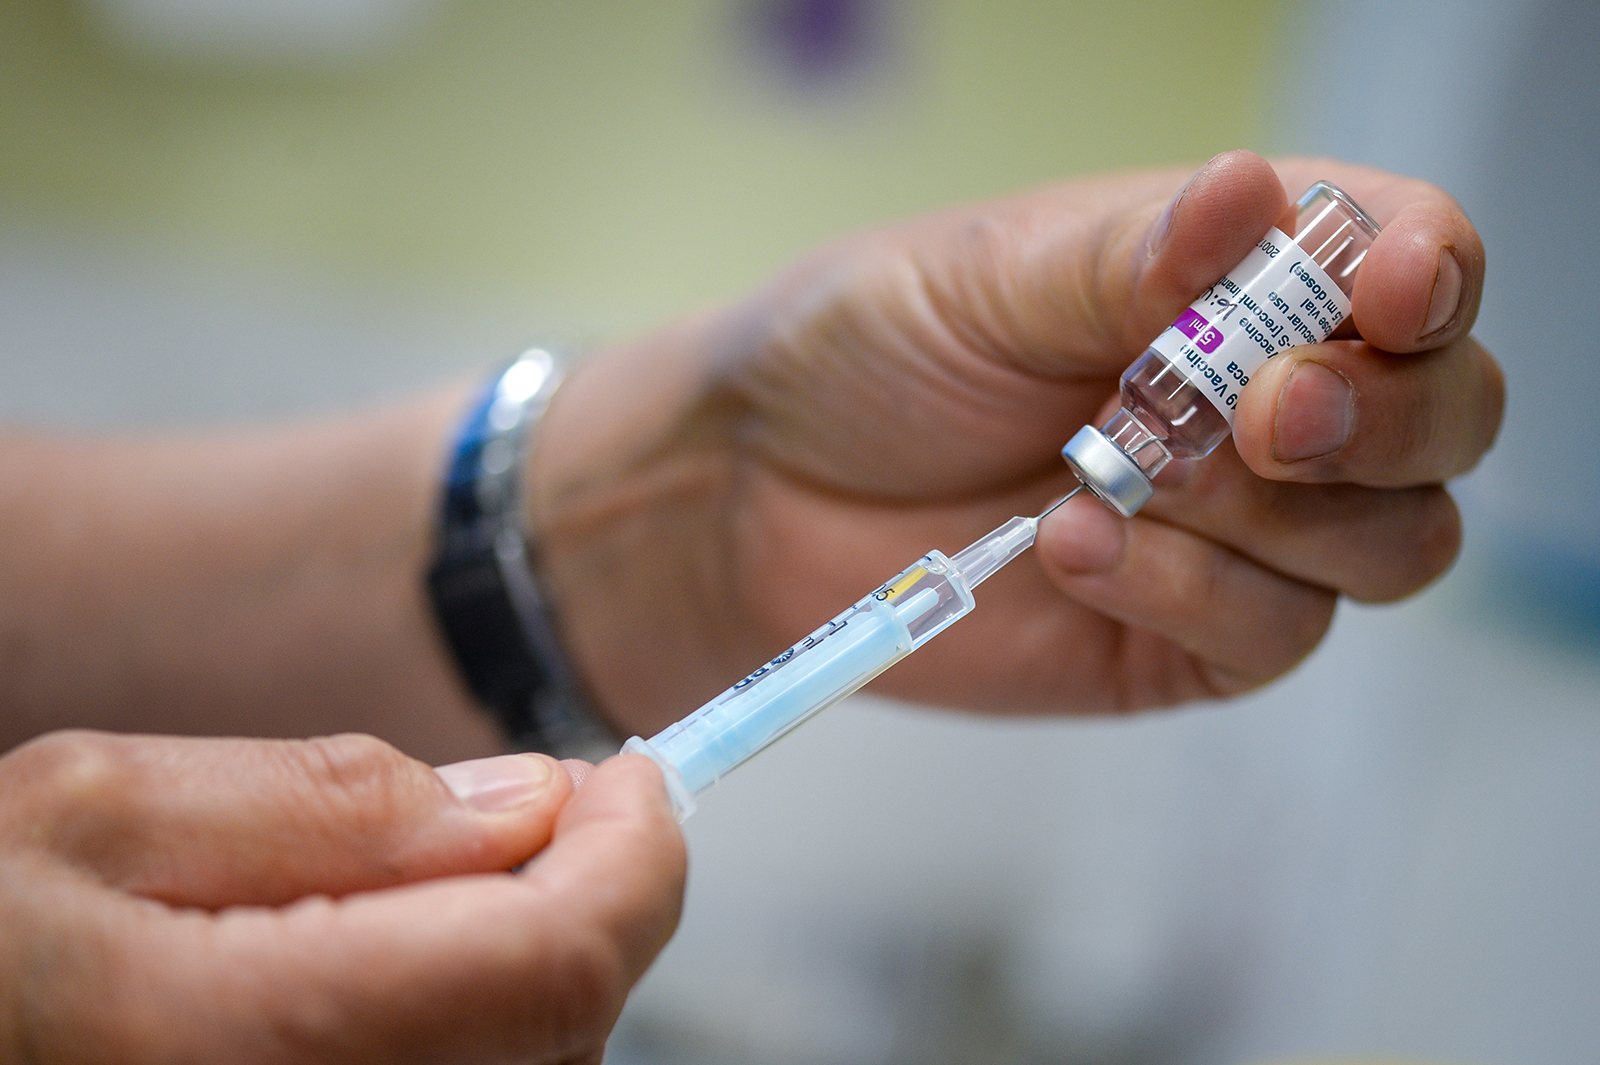 A vaccinator administers the Oxford-AstraZeneca Covid-19 Vaccine at a medical center in Bridport, England, on March 20.